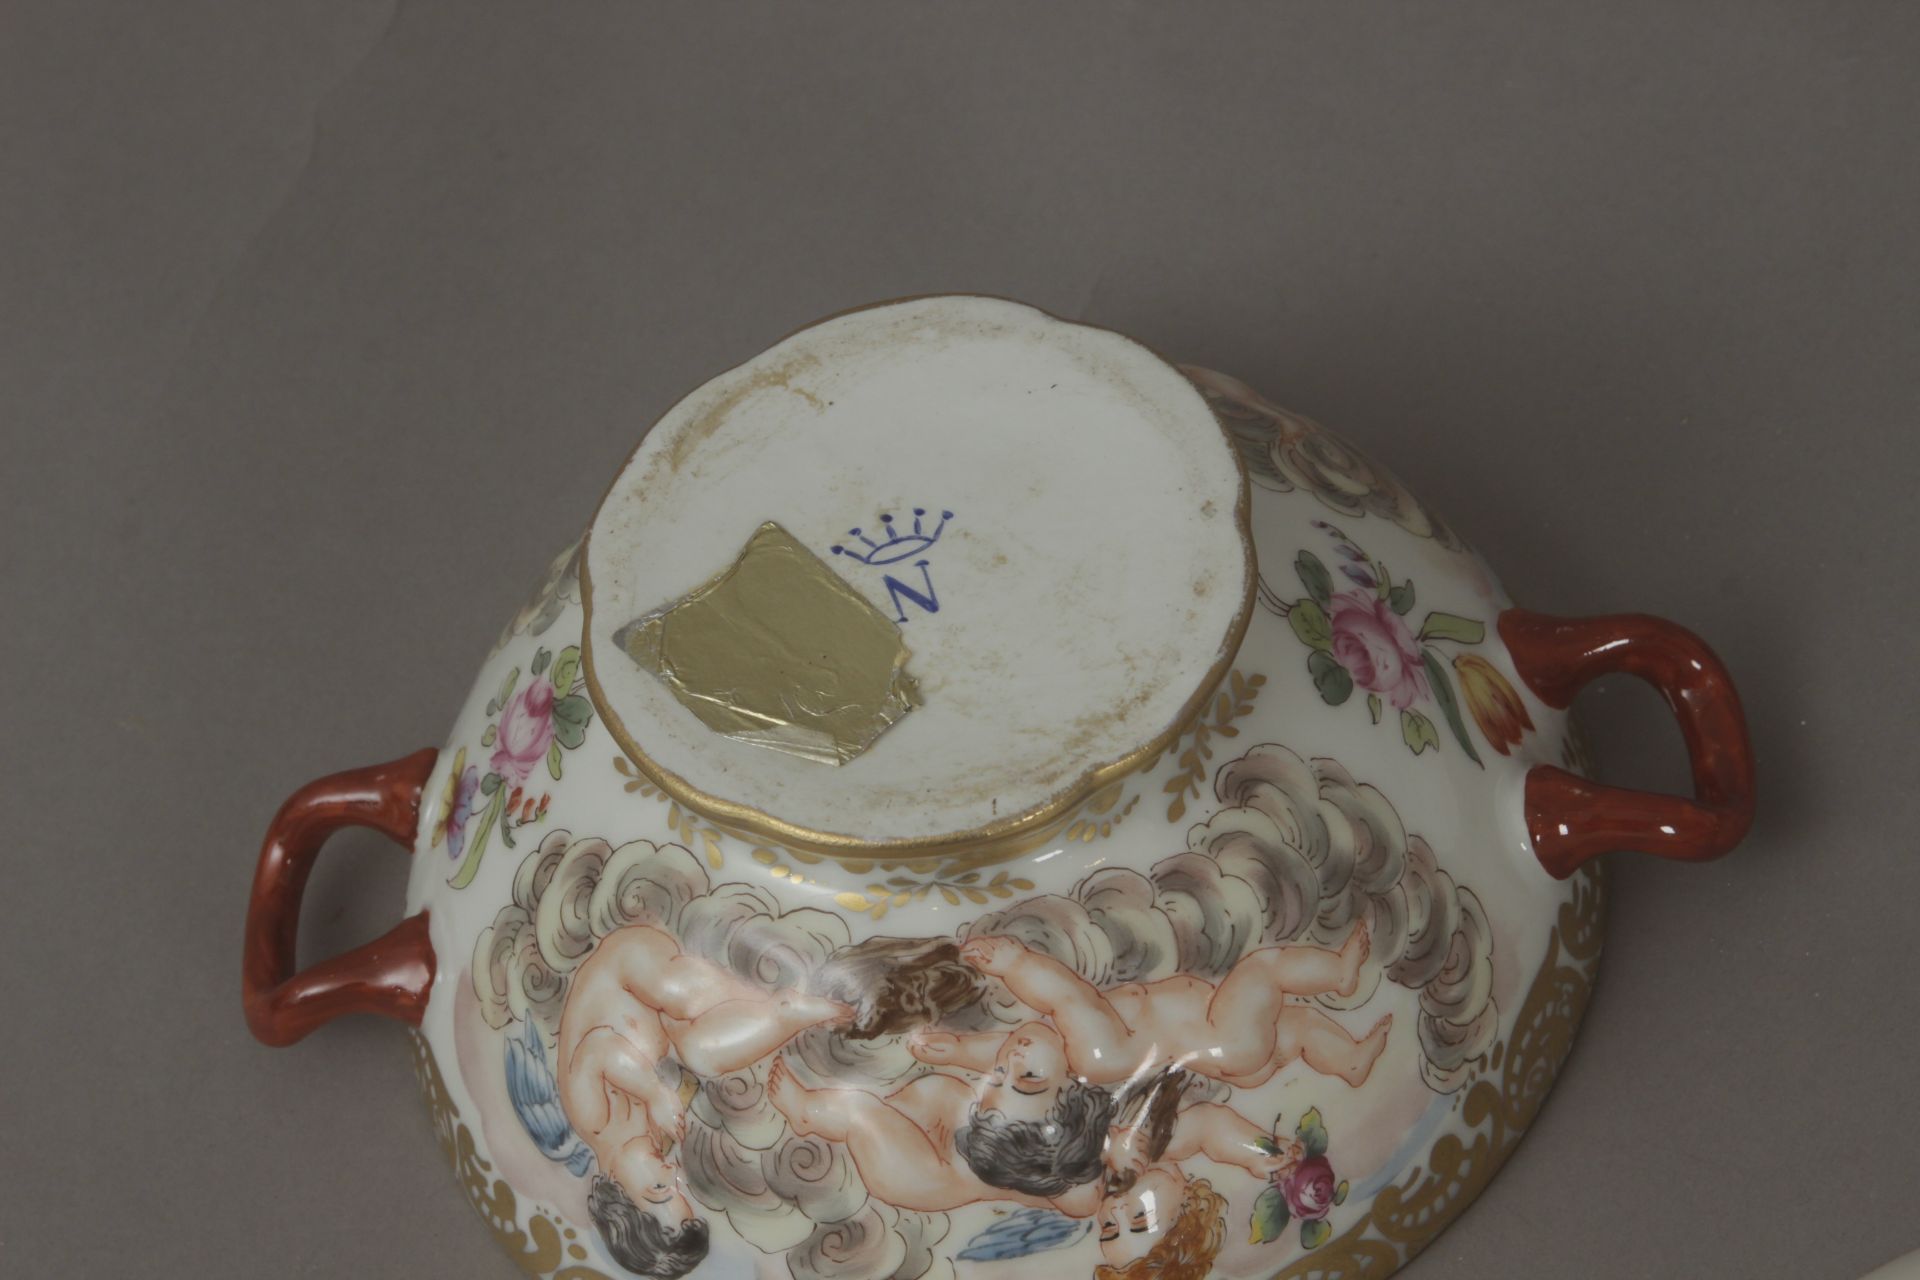 A 19th century Italian container in Capodimonte porcelain - Image 5 of 5